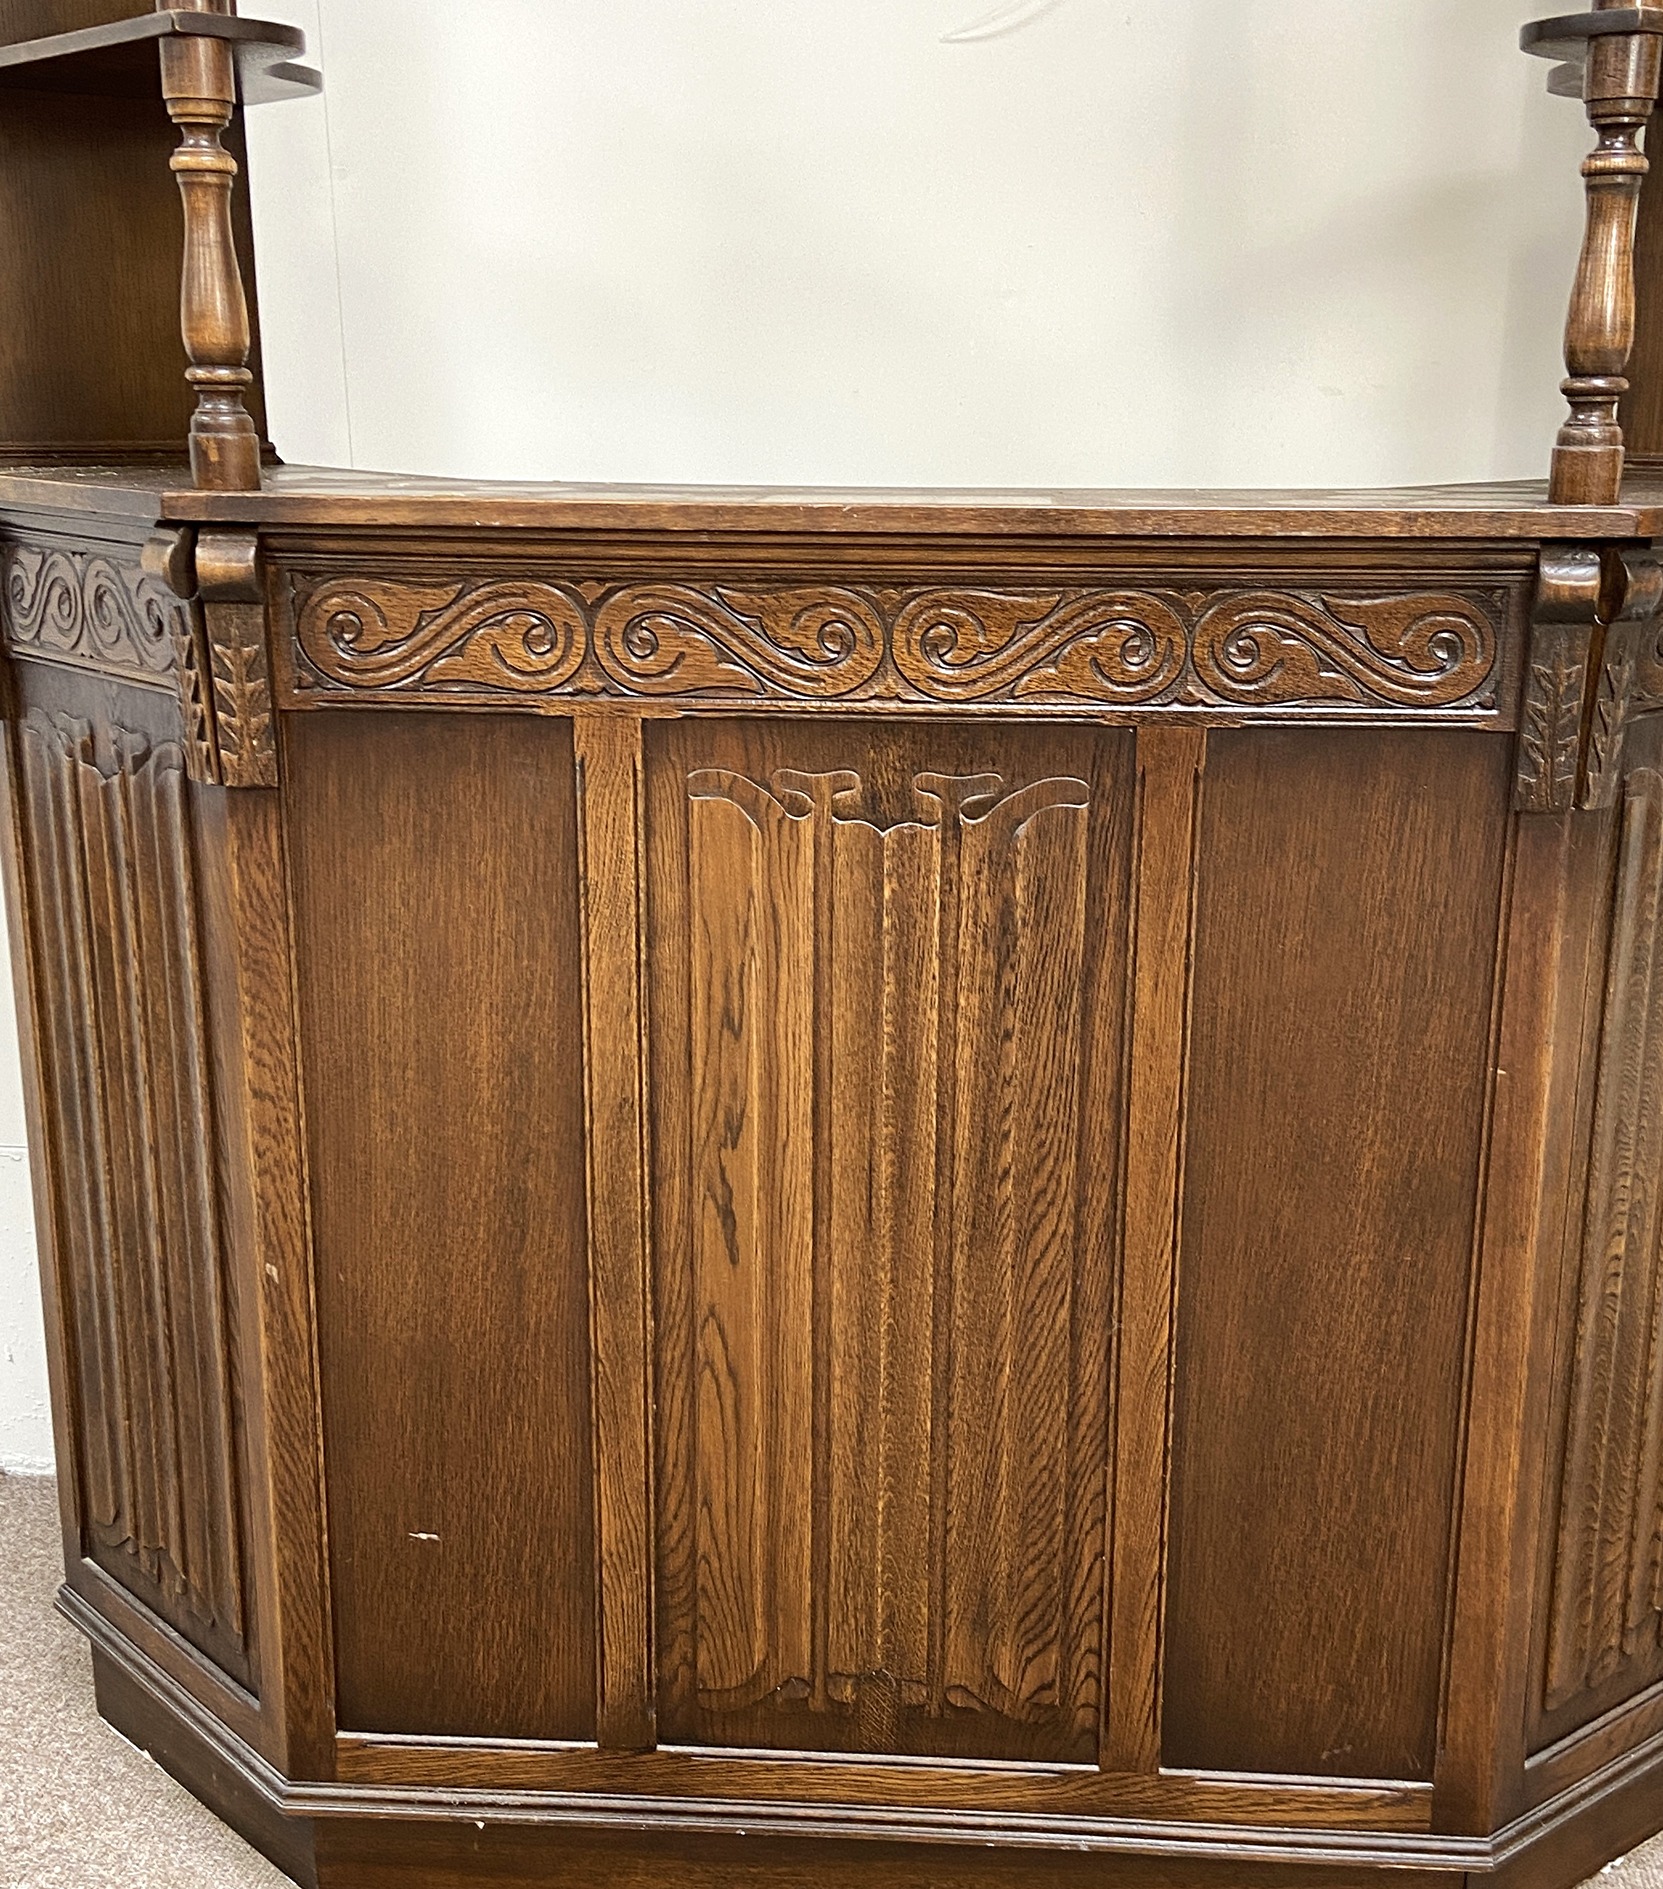 A vintage oak Jacobean style bar, mid 20th century, with canted sides and arched cornice over the - Image 4 of 5